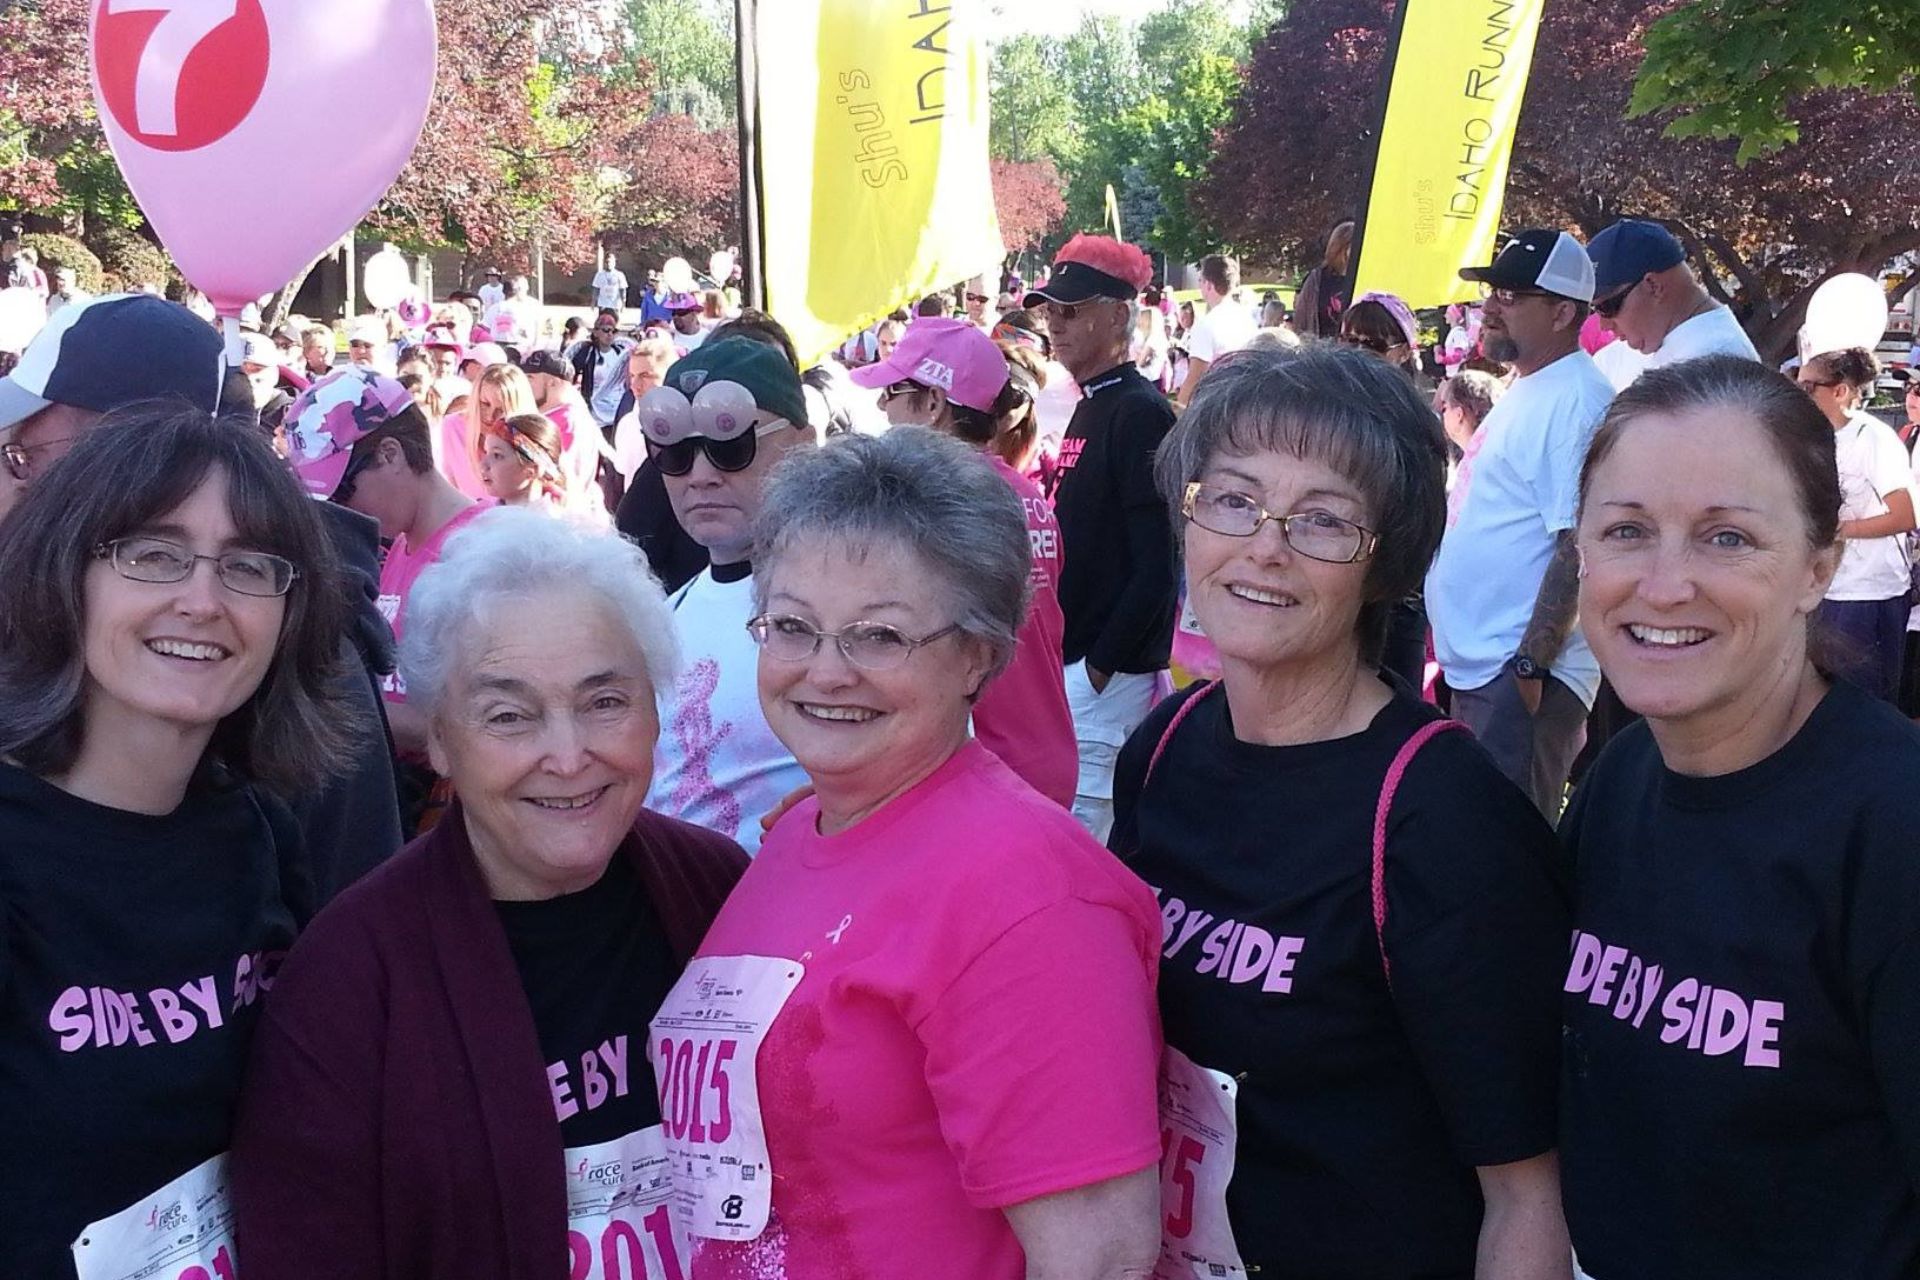 In loving memory of my mother (Ann Danes - March 2020) and my sister (Annette Hiatt - July 2019) who were both victims of breast cancer. May we always be side by side.